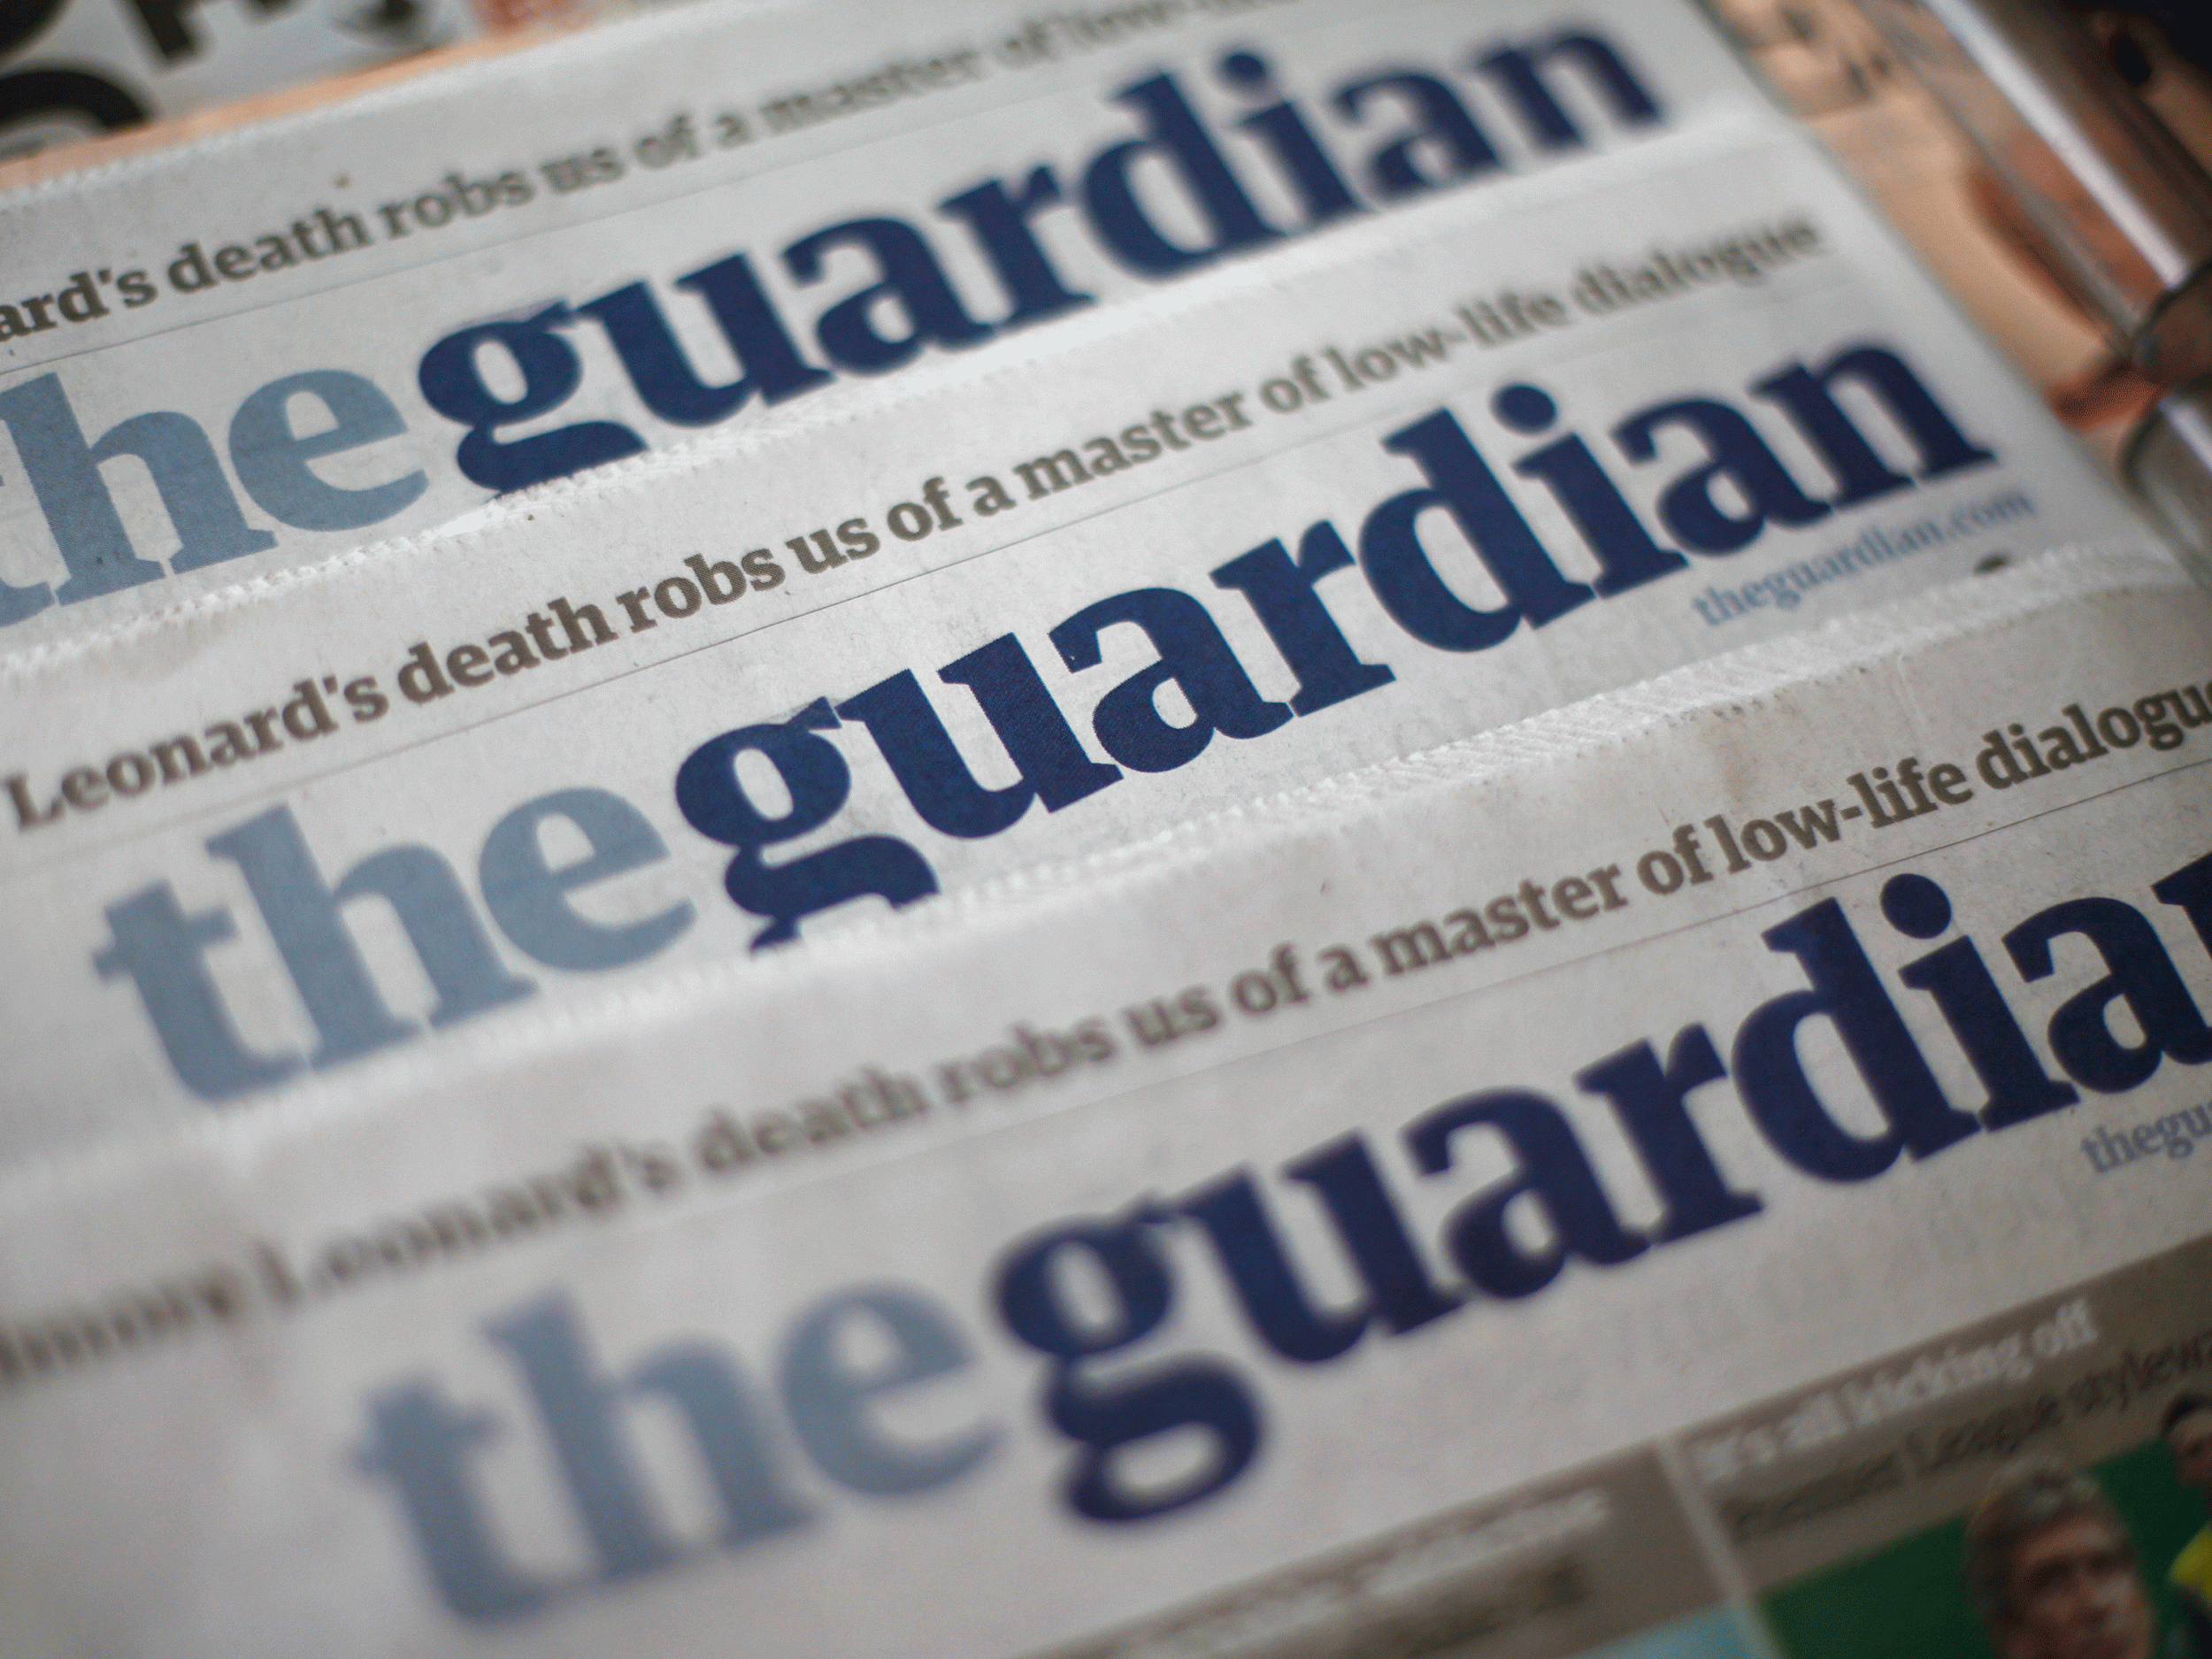 Publisher Guardian Media Group said in 2016 that it would need to save 20 per cent to counter underlying losses